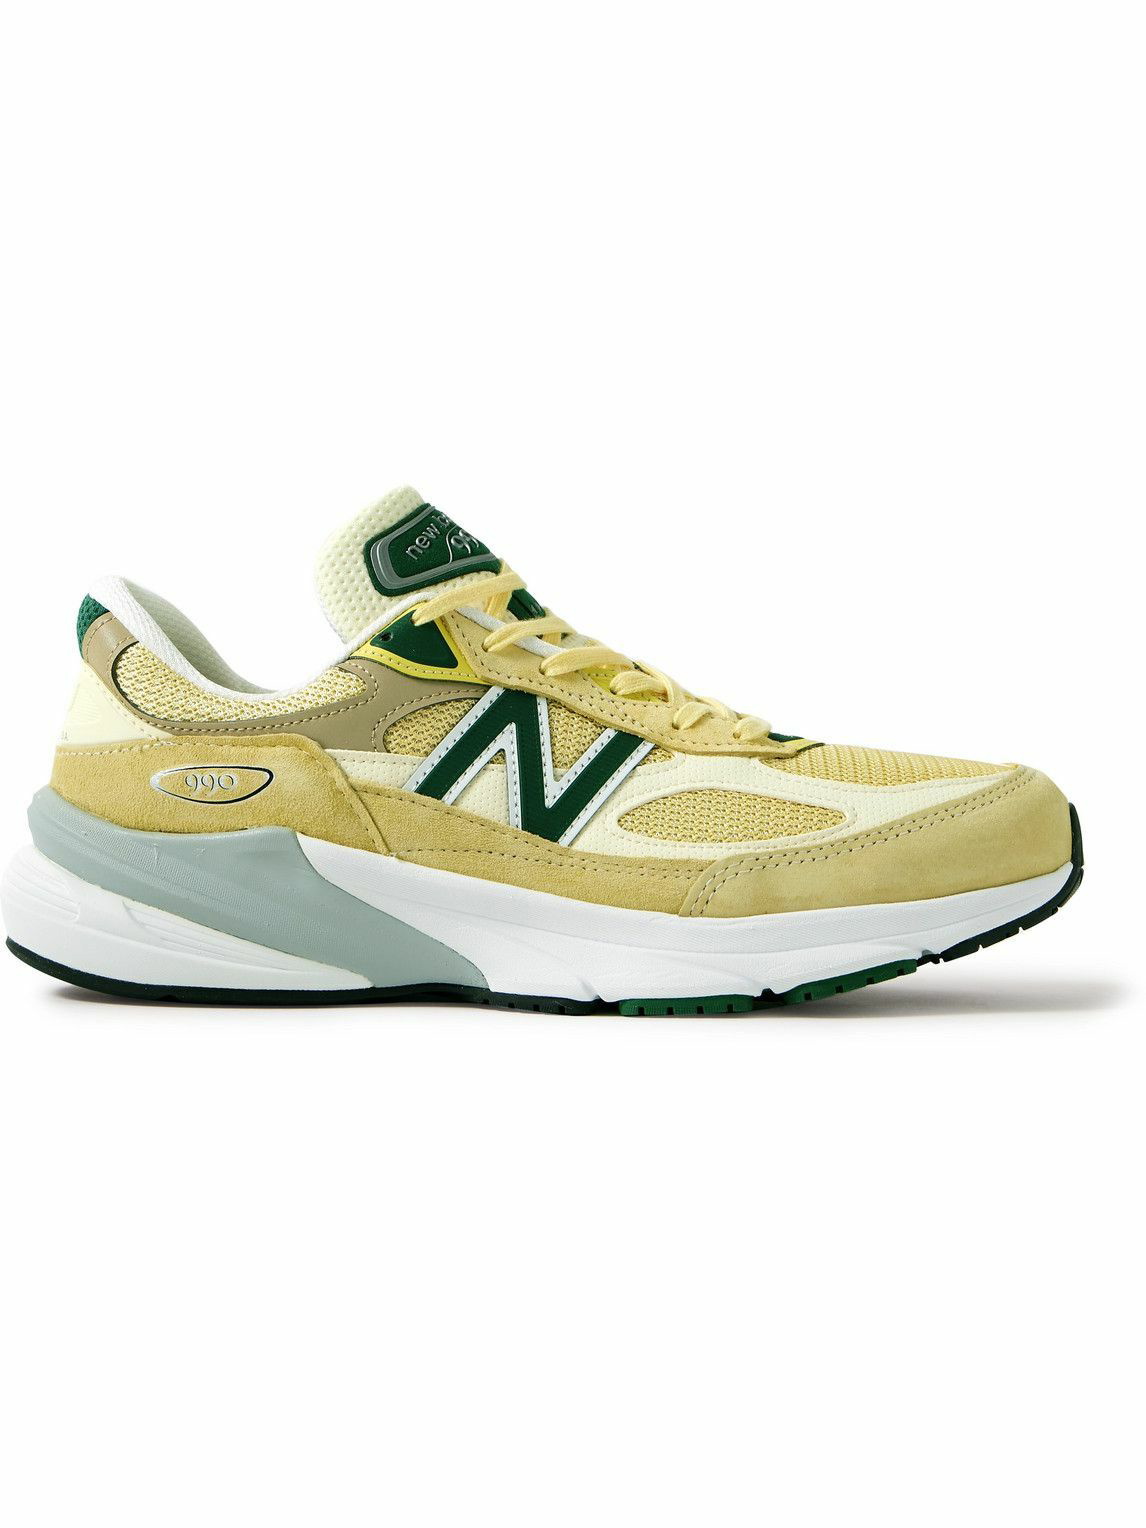 New Balance - 990v6 Suede-Trimmed Mesh Sneakers - Yellow New Balance